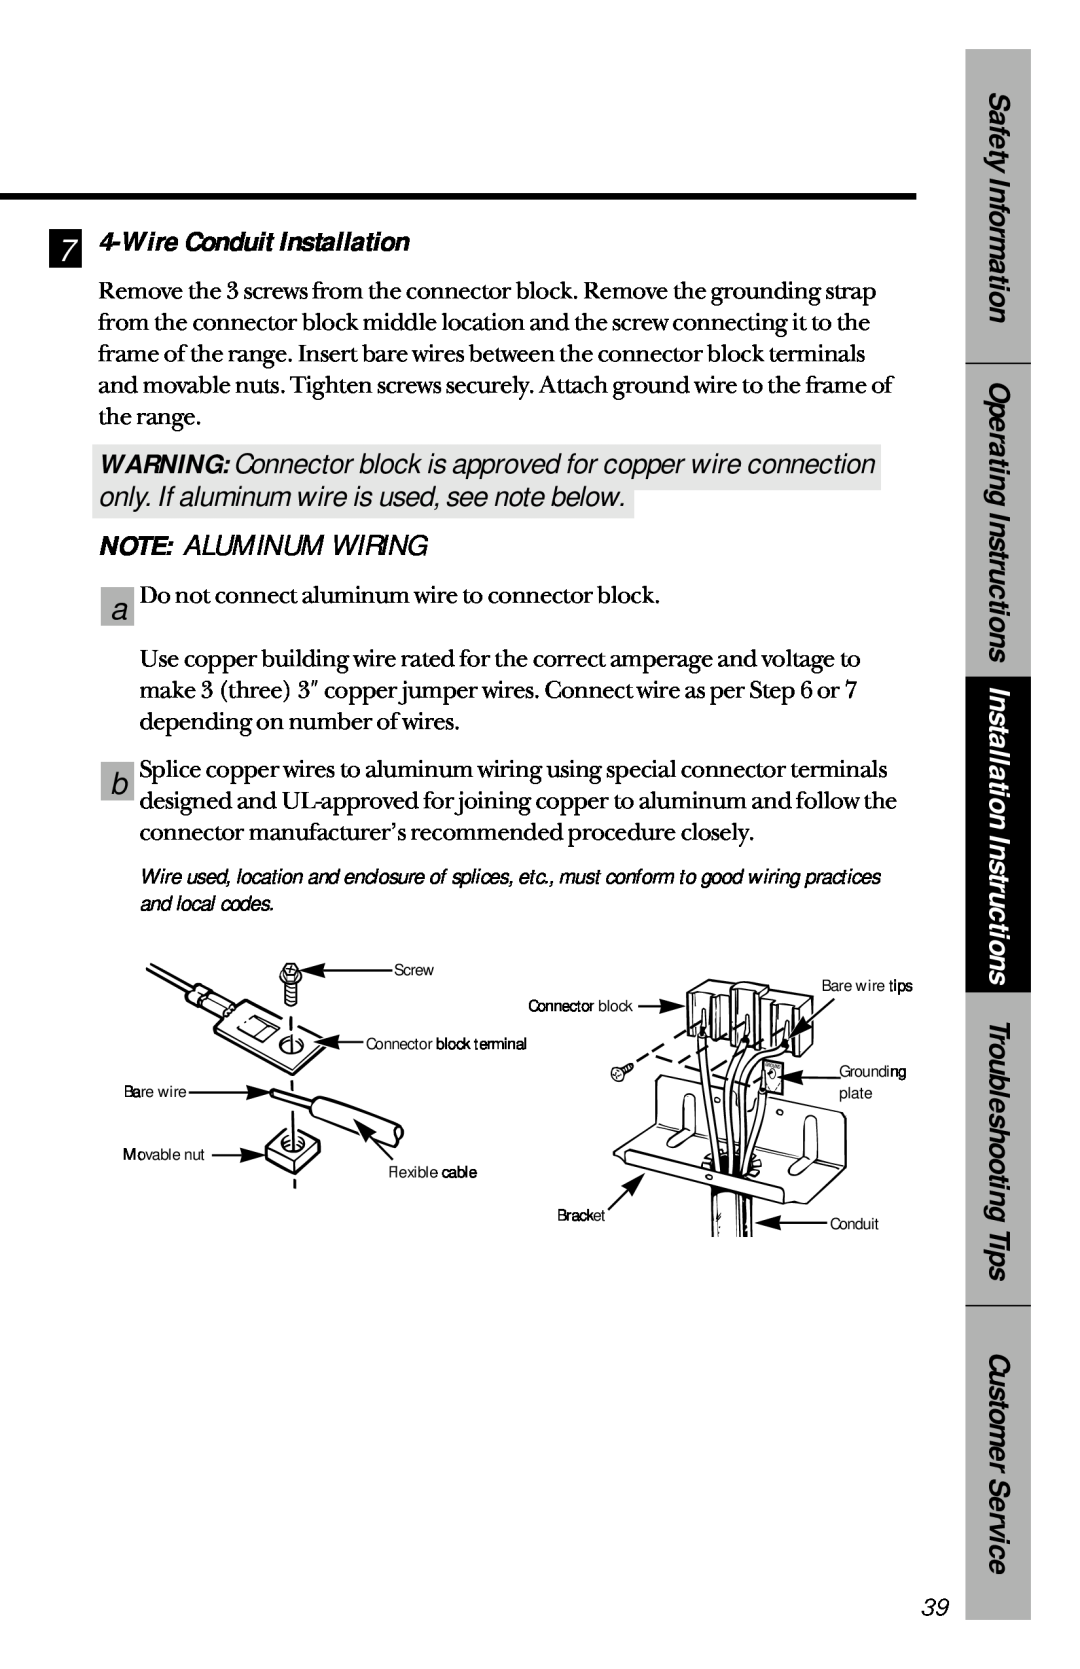 GE 164D3333P150 owner manual 7 4-Wire Conduit Installation, Note Aluminum Wiring, Grounding 